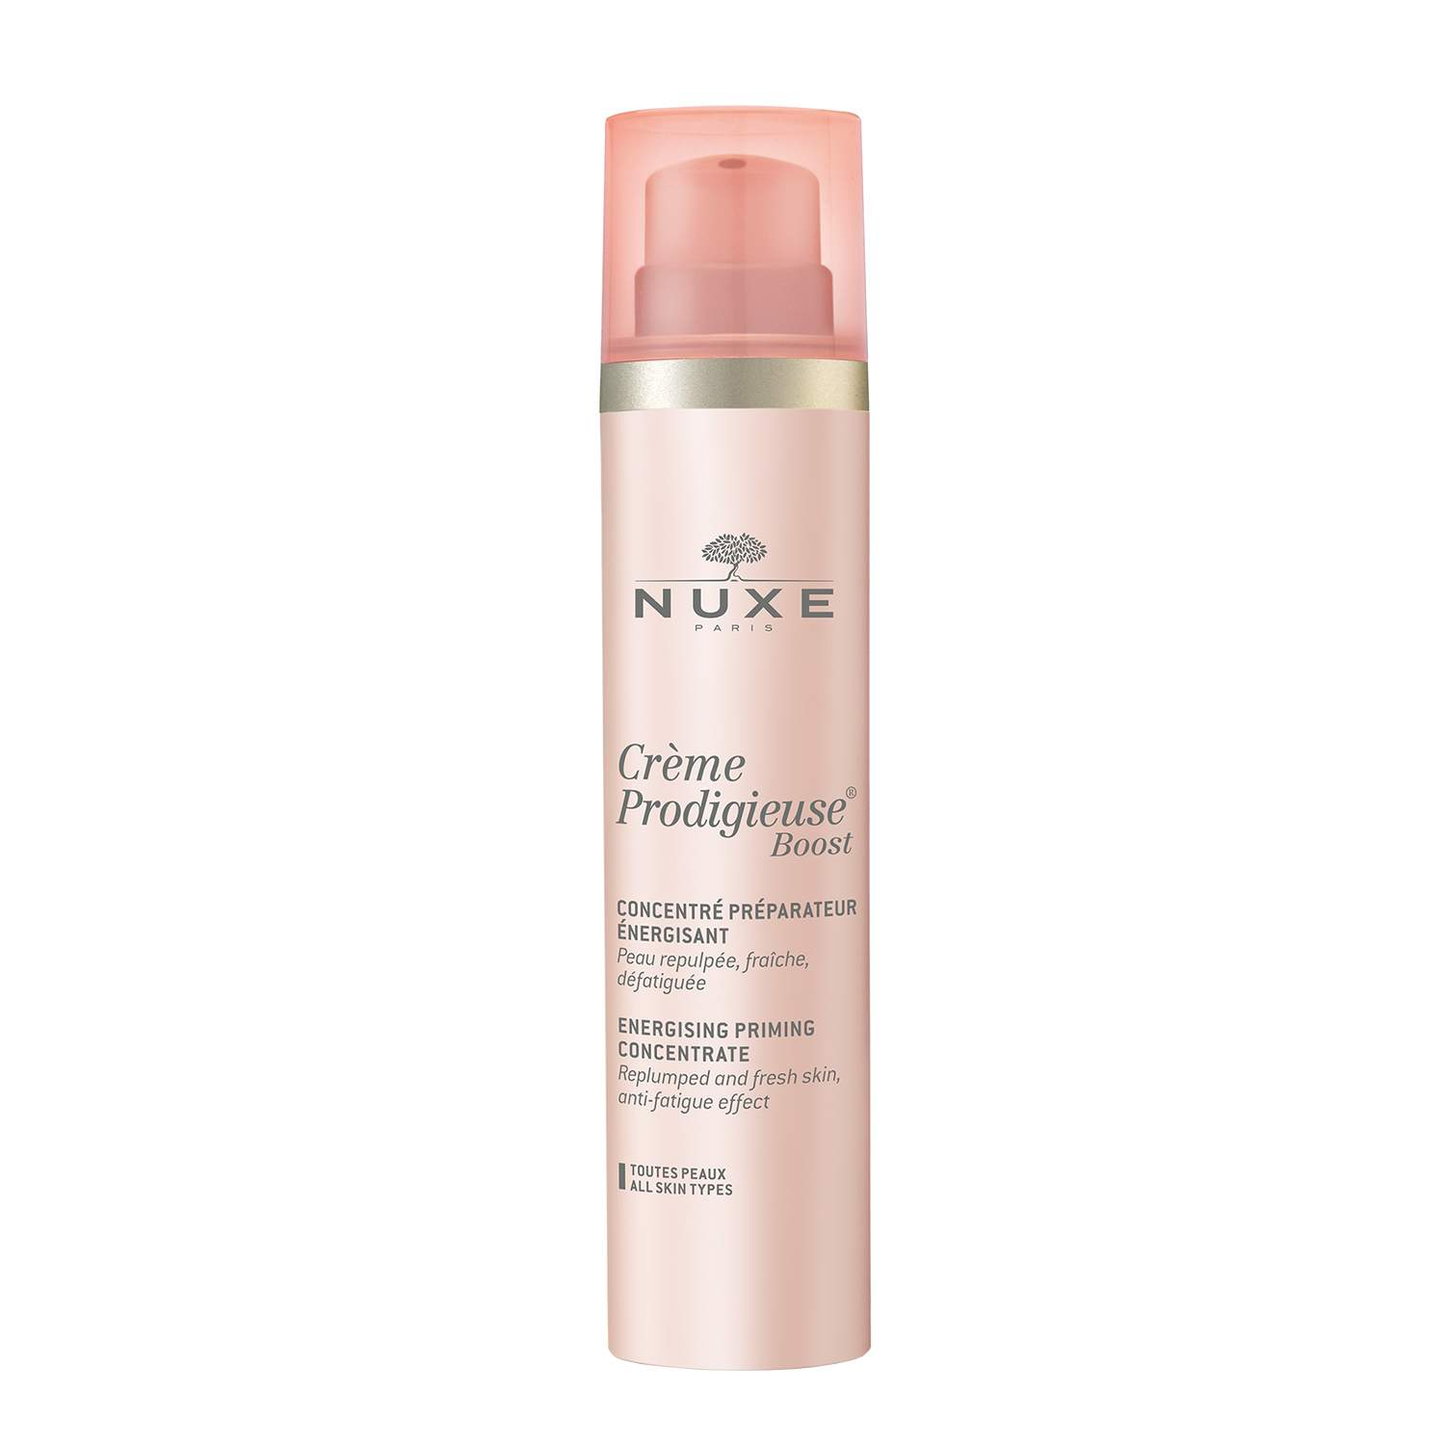 NUXE Crème Prodigieuse® Boost Energising Priming Concentrate